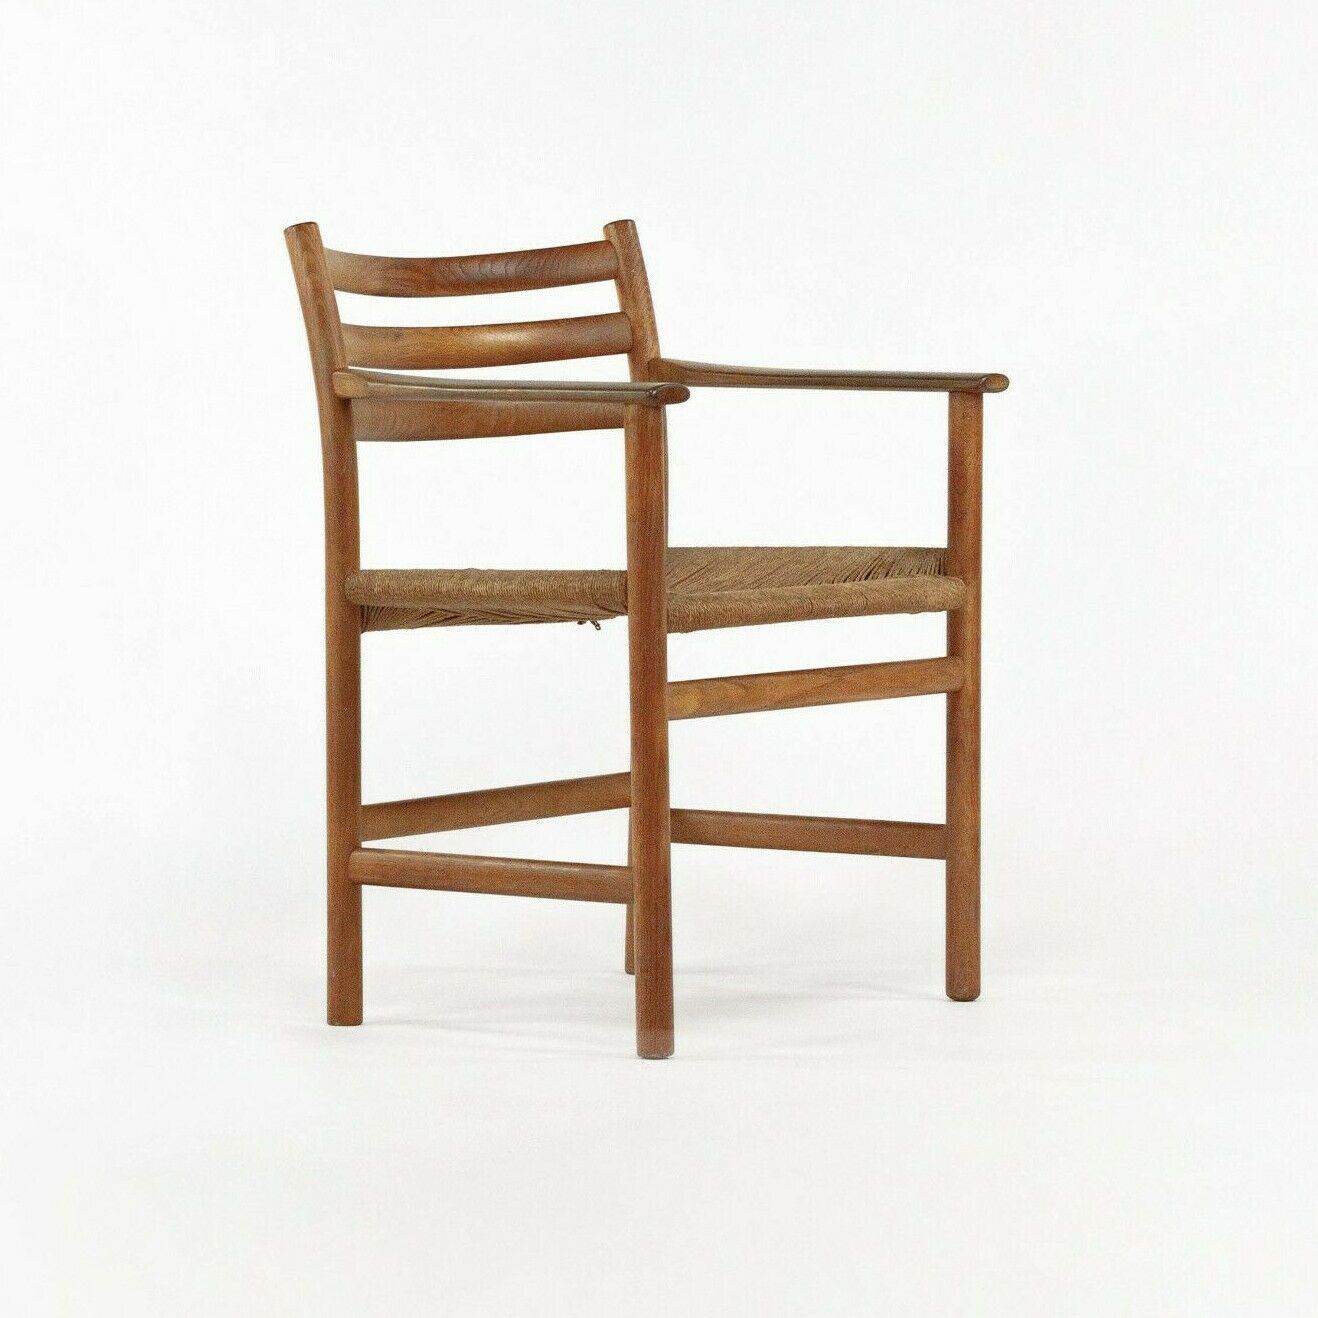 1960s Model 351 Dining Arm Chair by Poul Volther for Soro Stolefabrik of Denmark